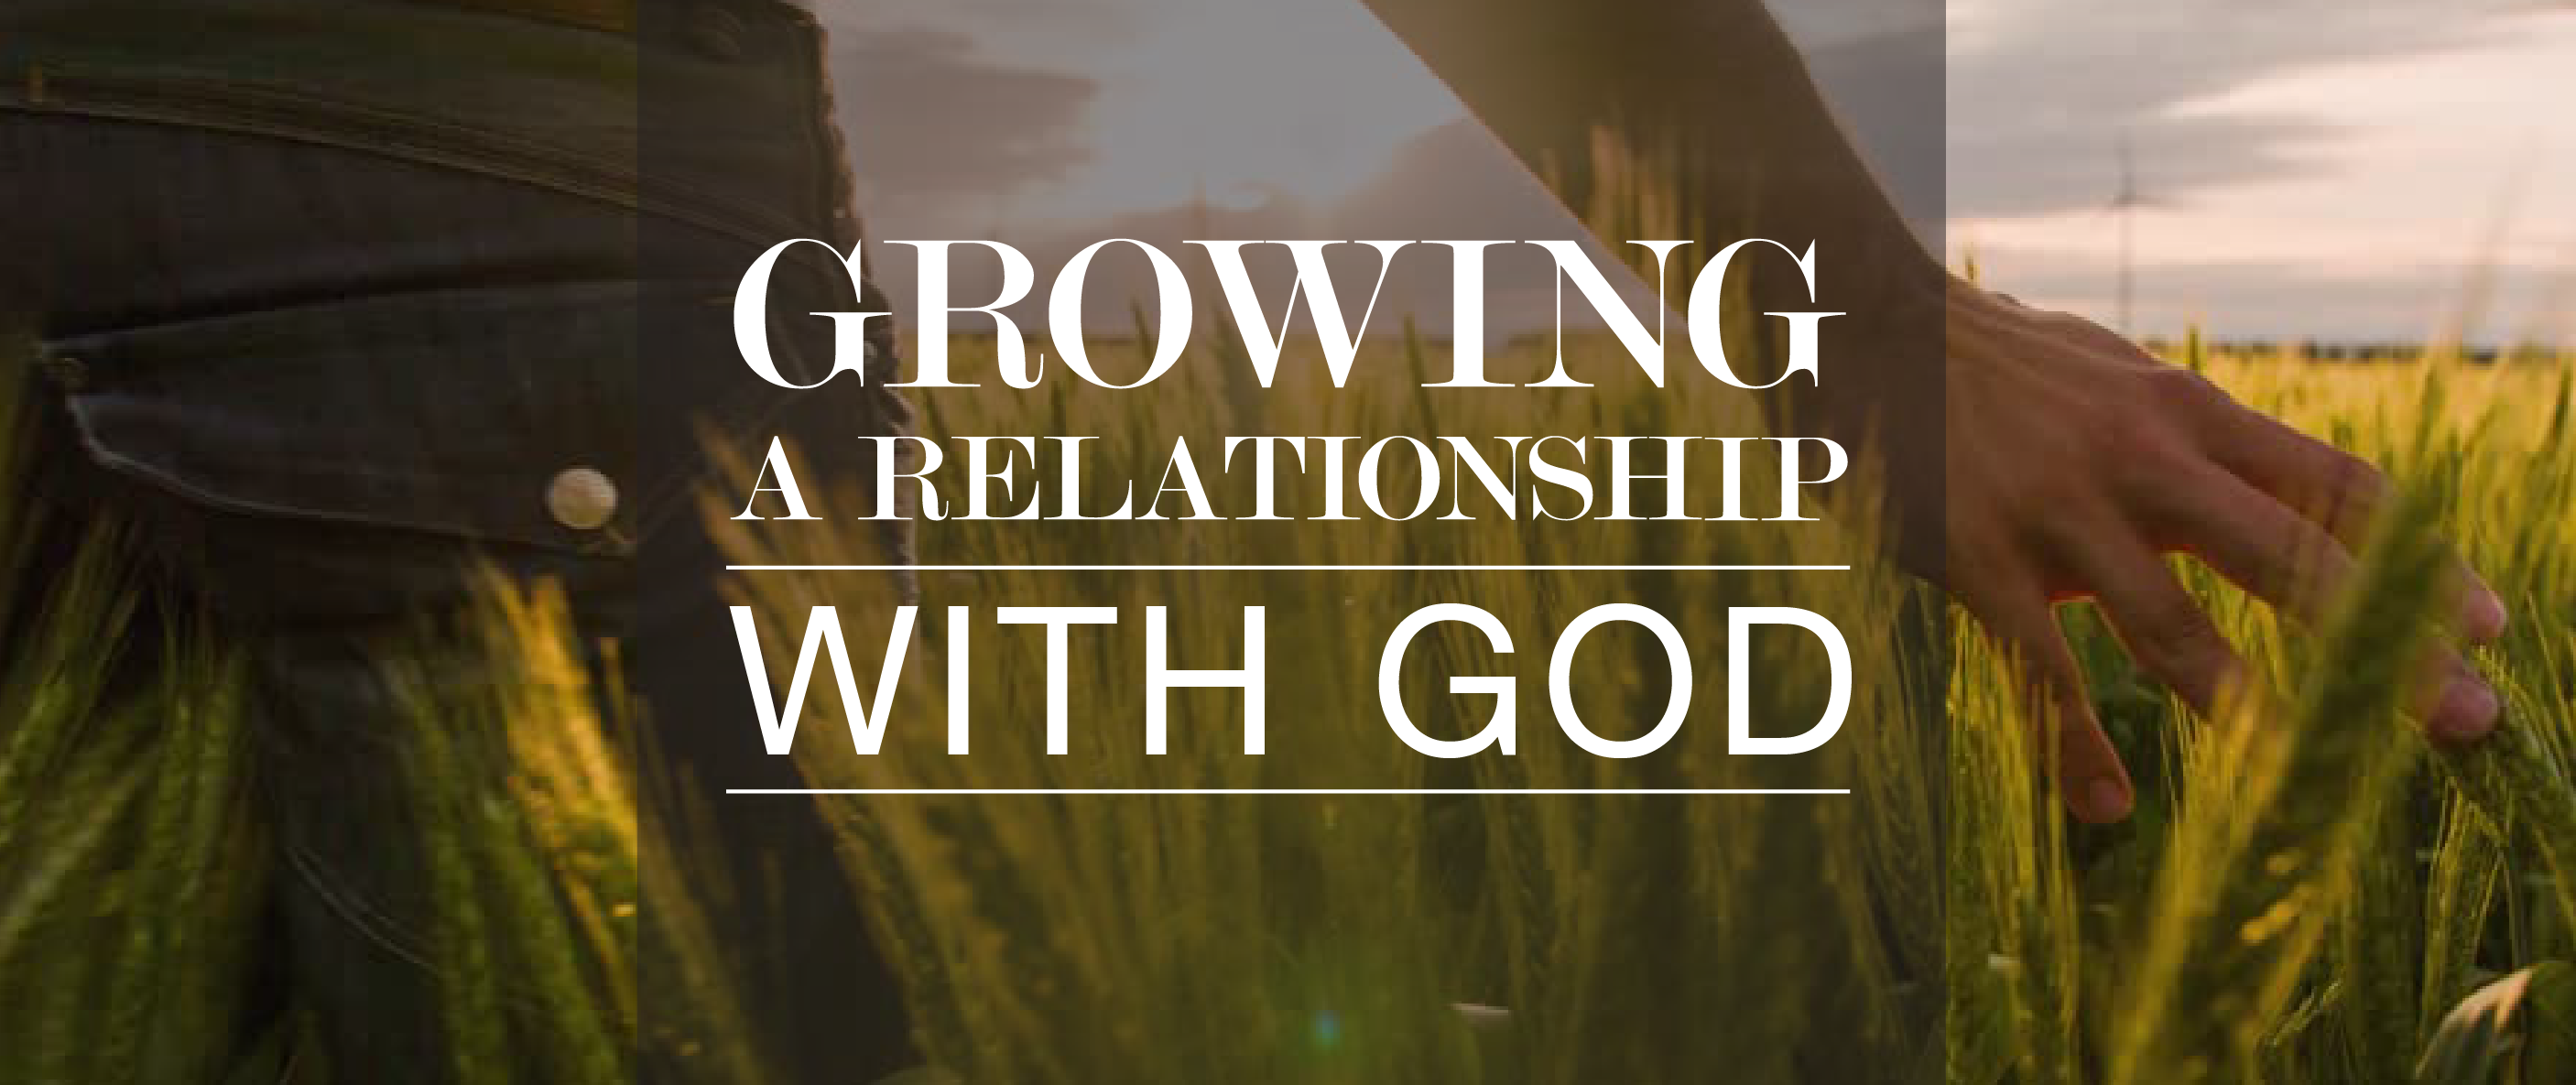 how to grow my relationship with god